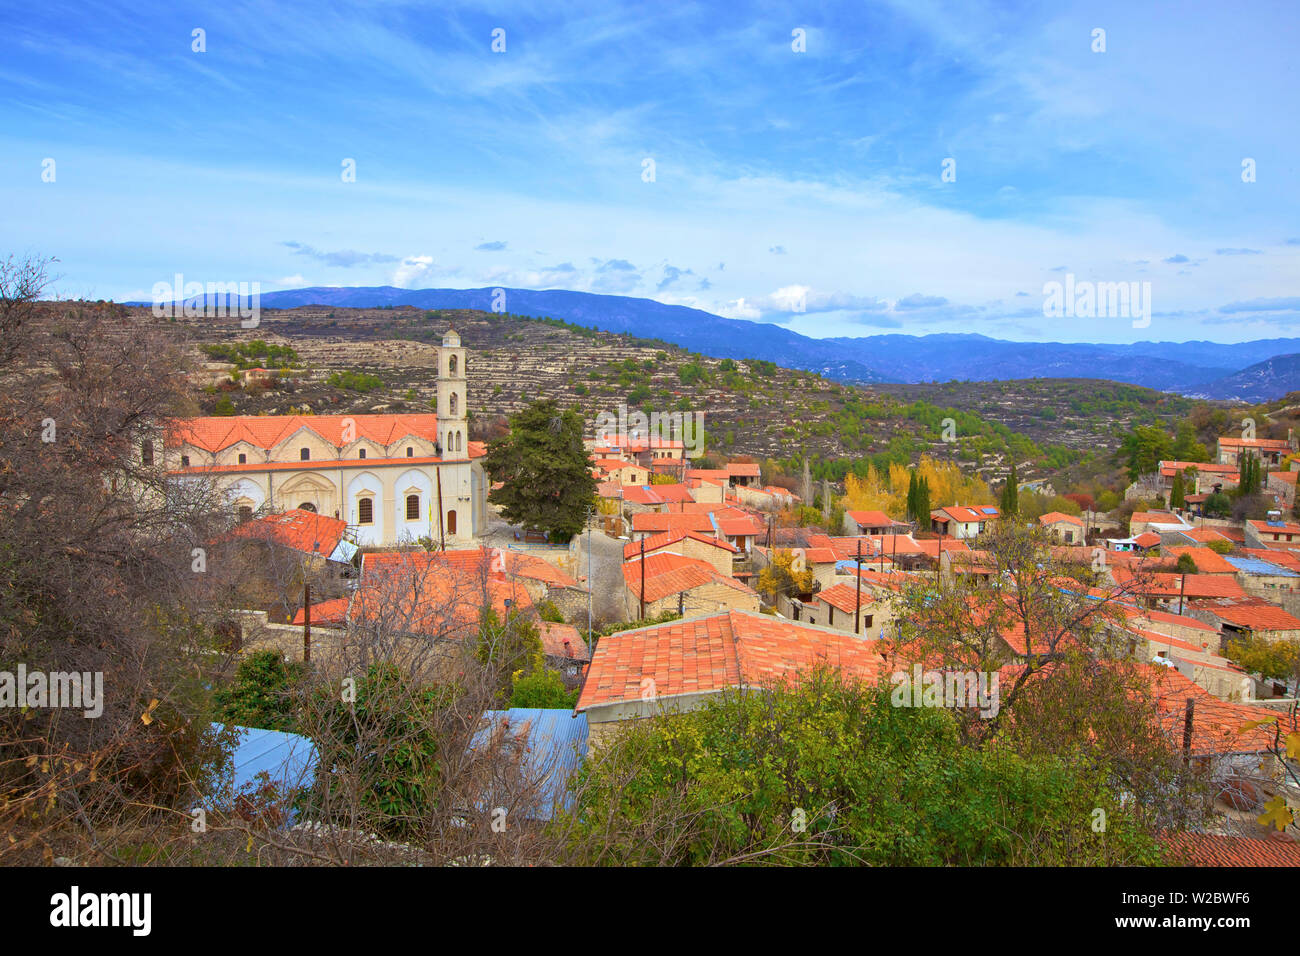 Church of the Annunciation and the Village of Lofou, Troodos Mountains, Cyprus, Eastern Mediterranean Sea Stock Photo